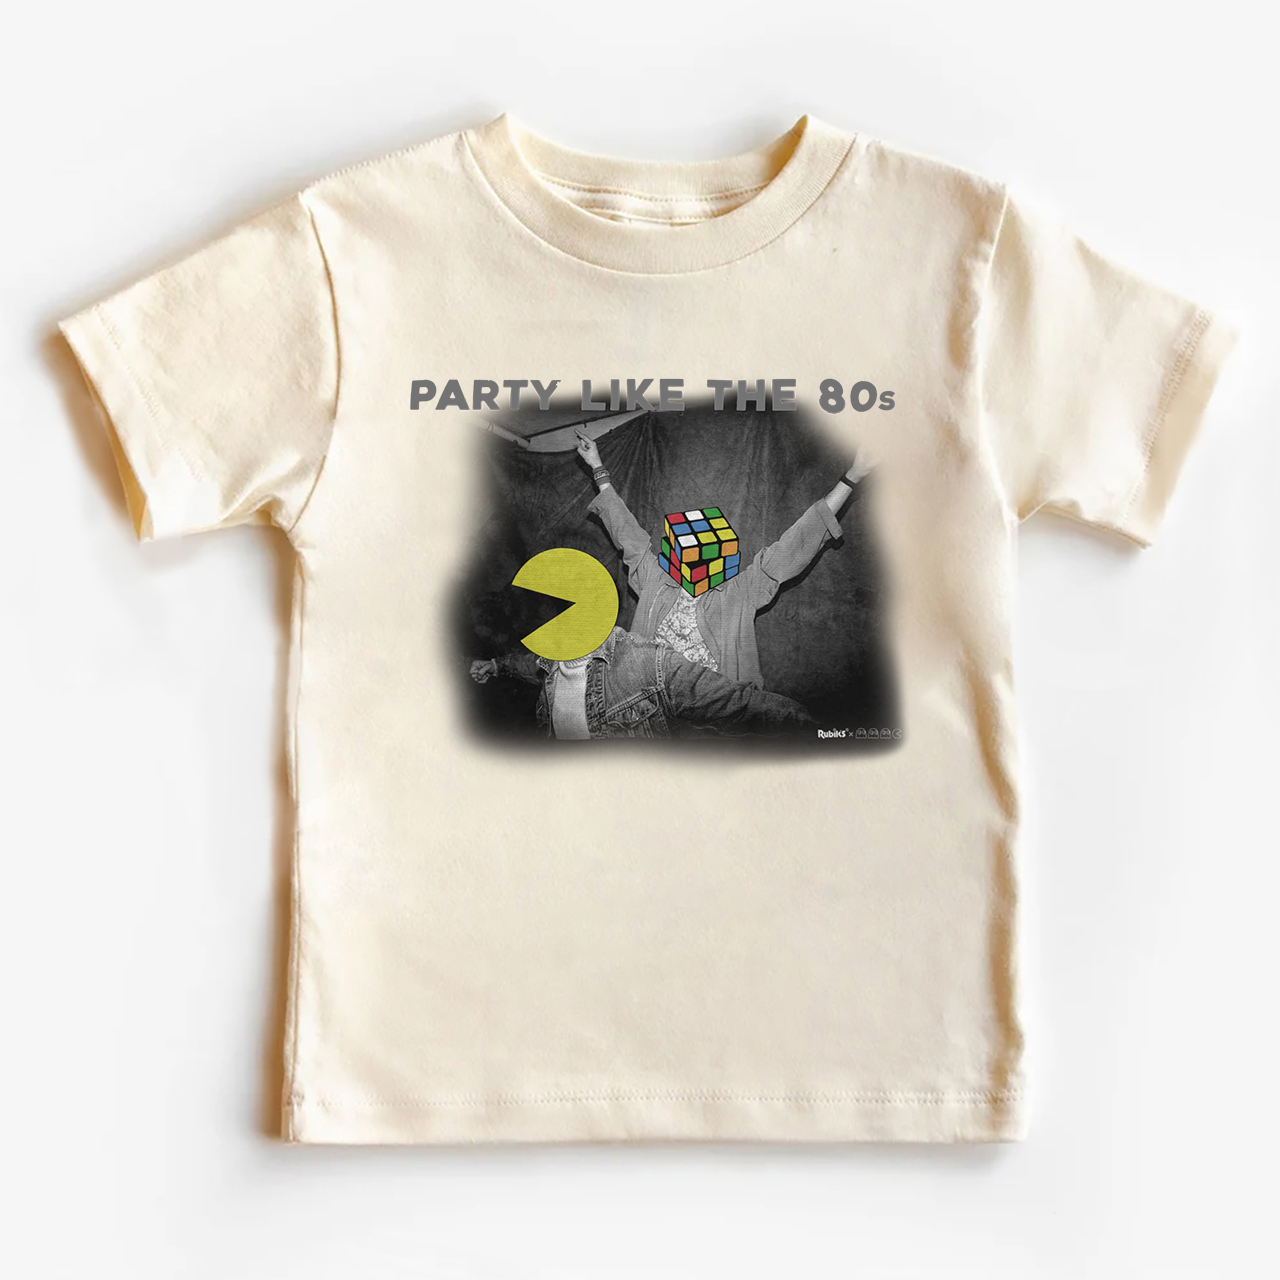 Party Like The 80s Kids Shirt